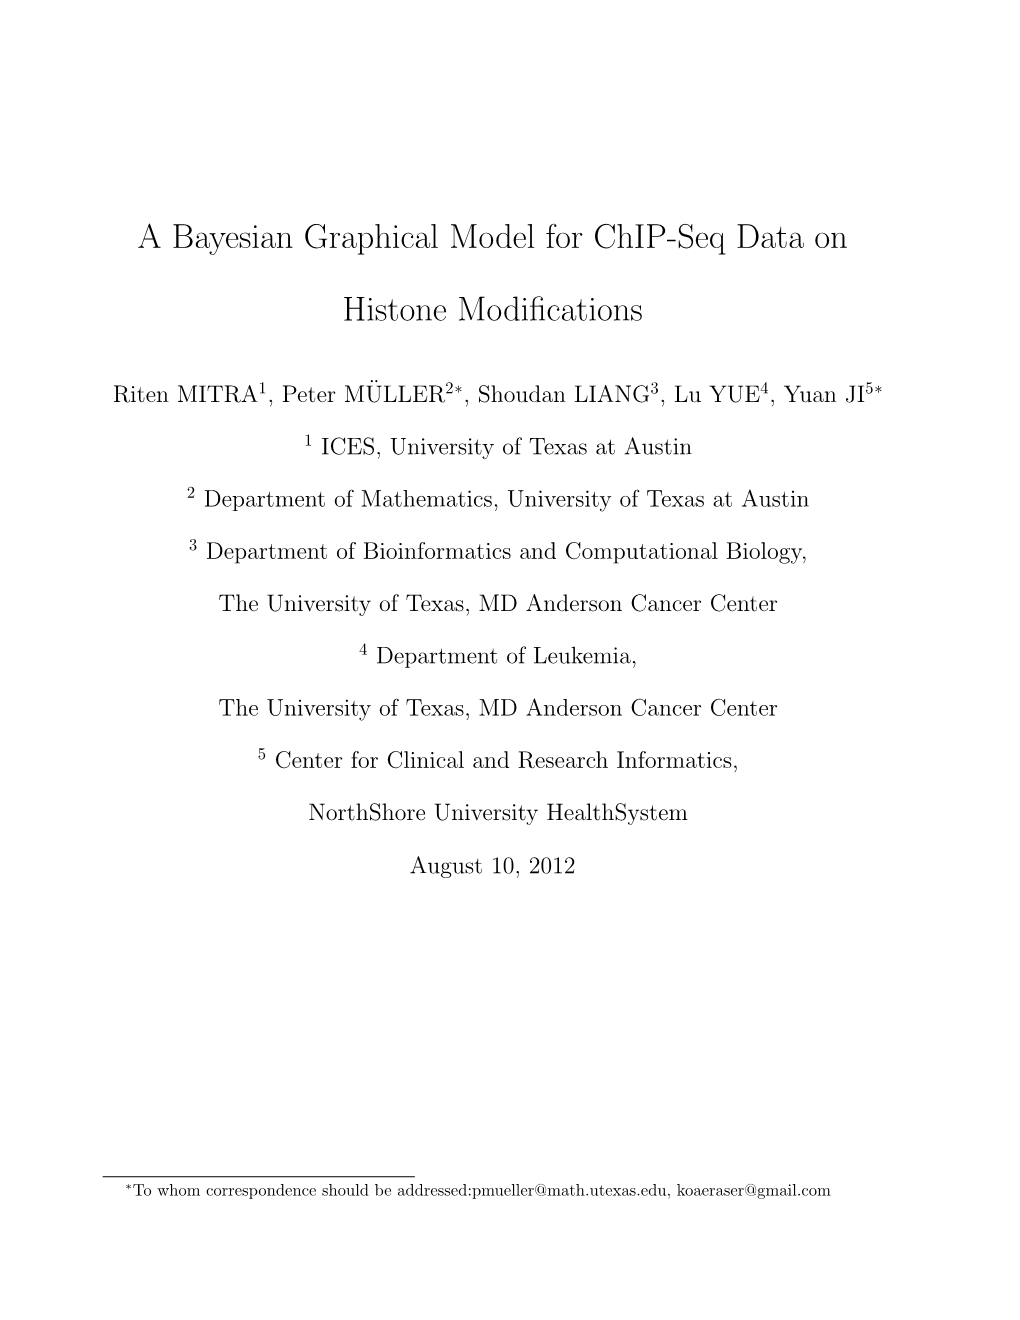 A Bayesian Graphical Model for Chip-Seq Data On